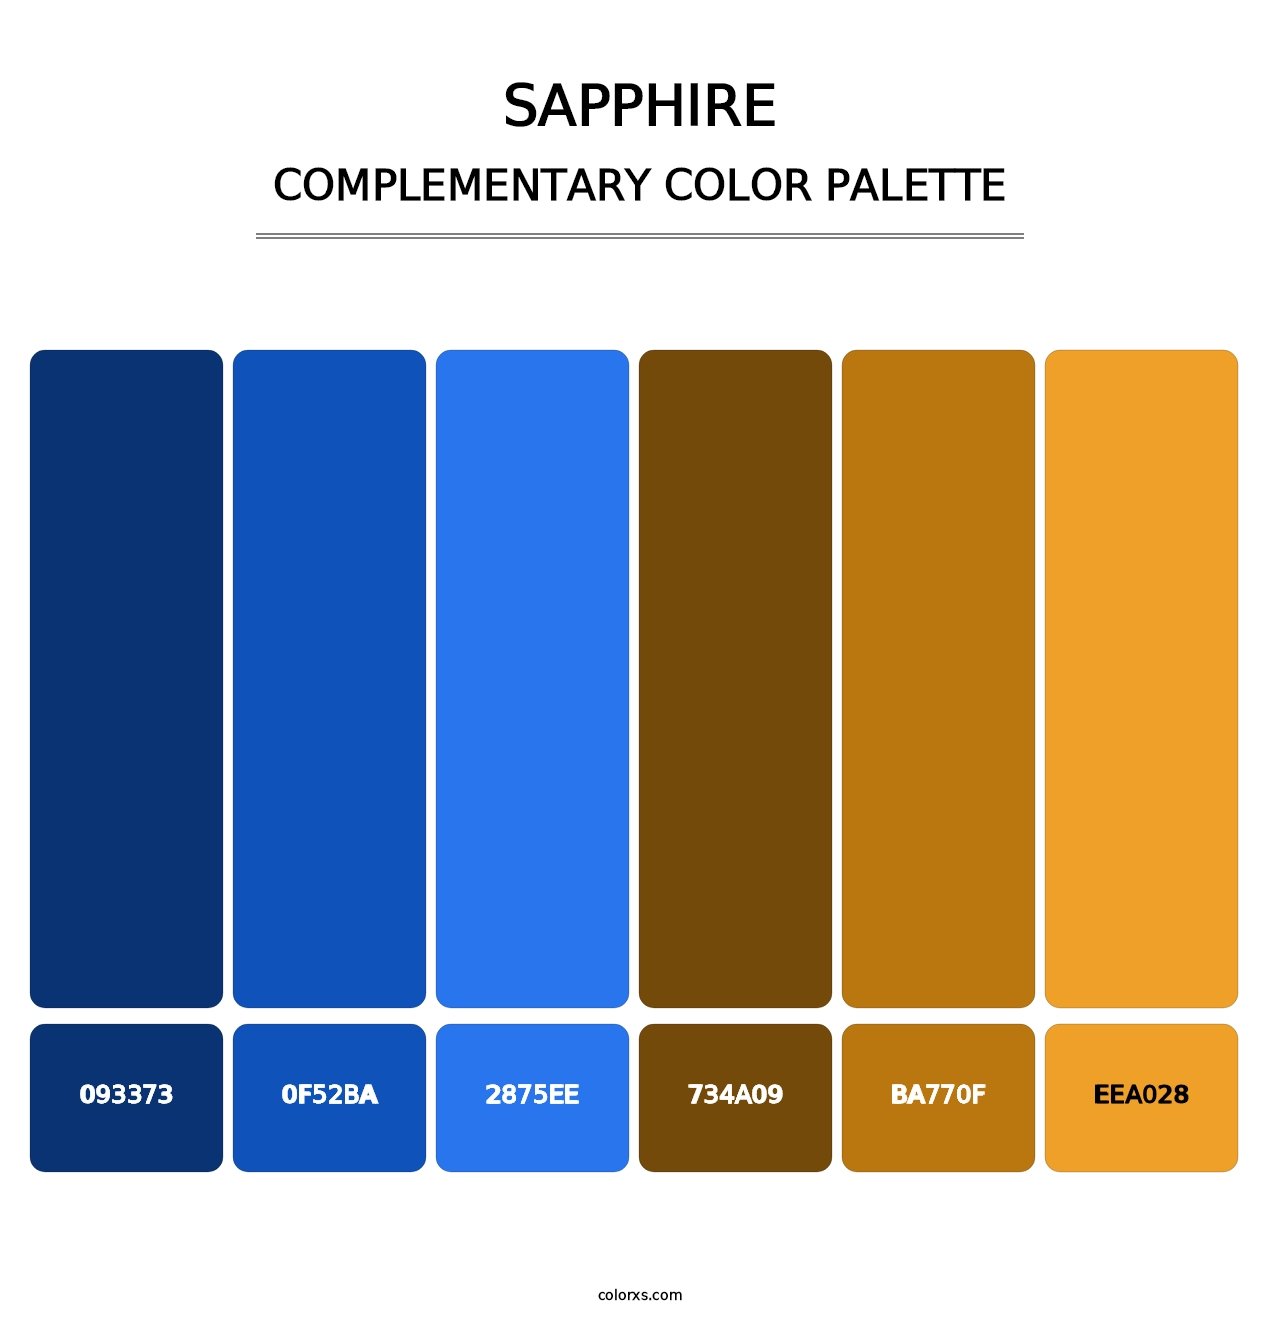 Sapphire - Complementary Color Palette